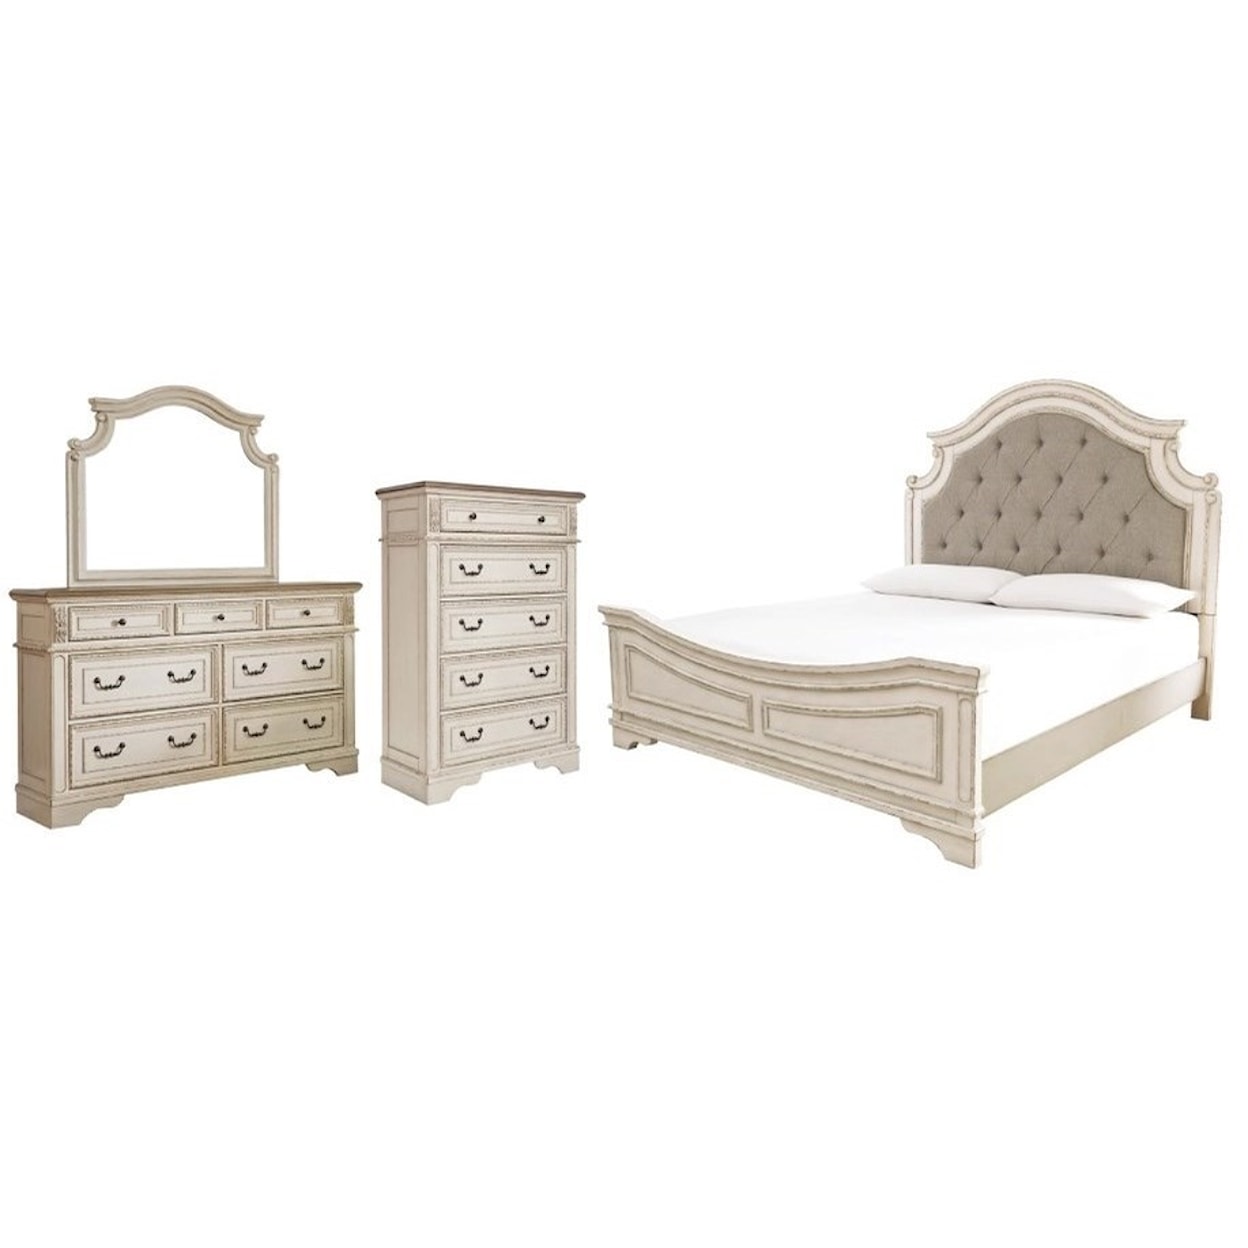 Signature Design by Ashley Realyn 5PC Queen Bedroom Group